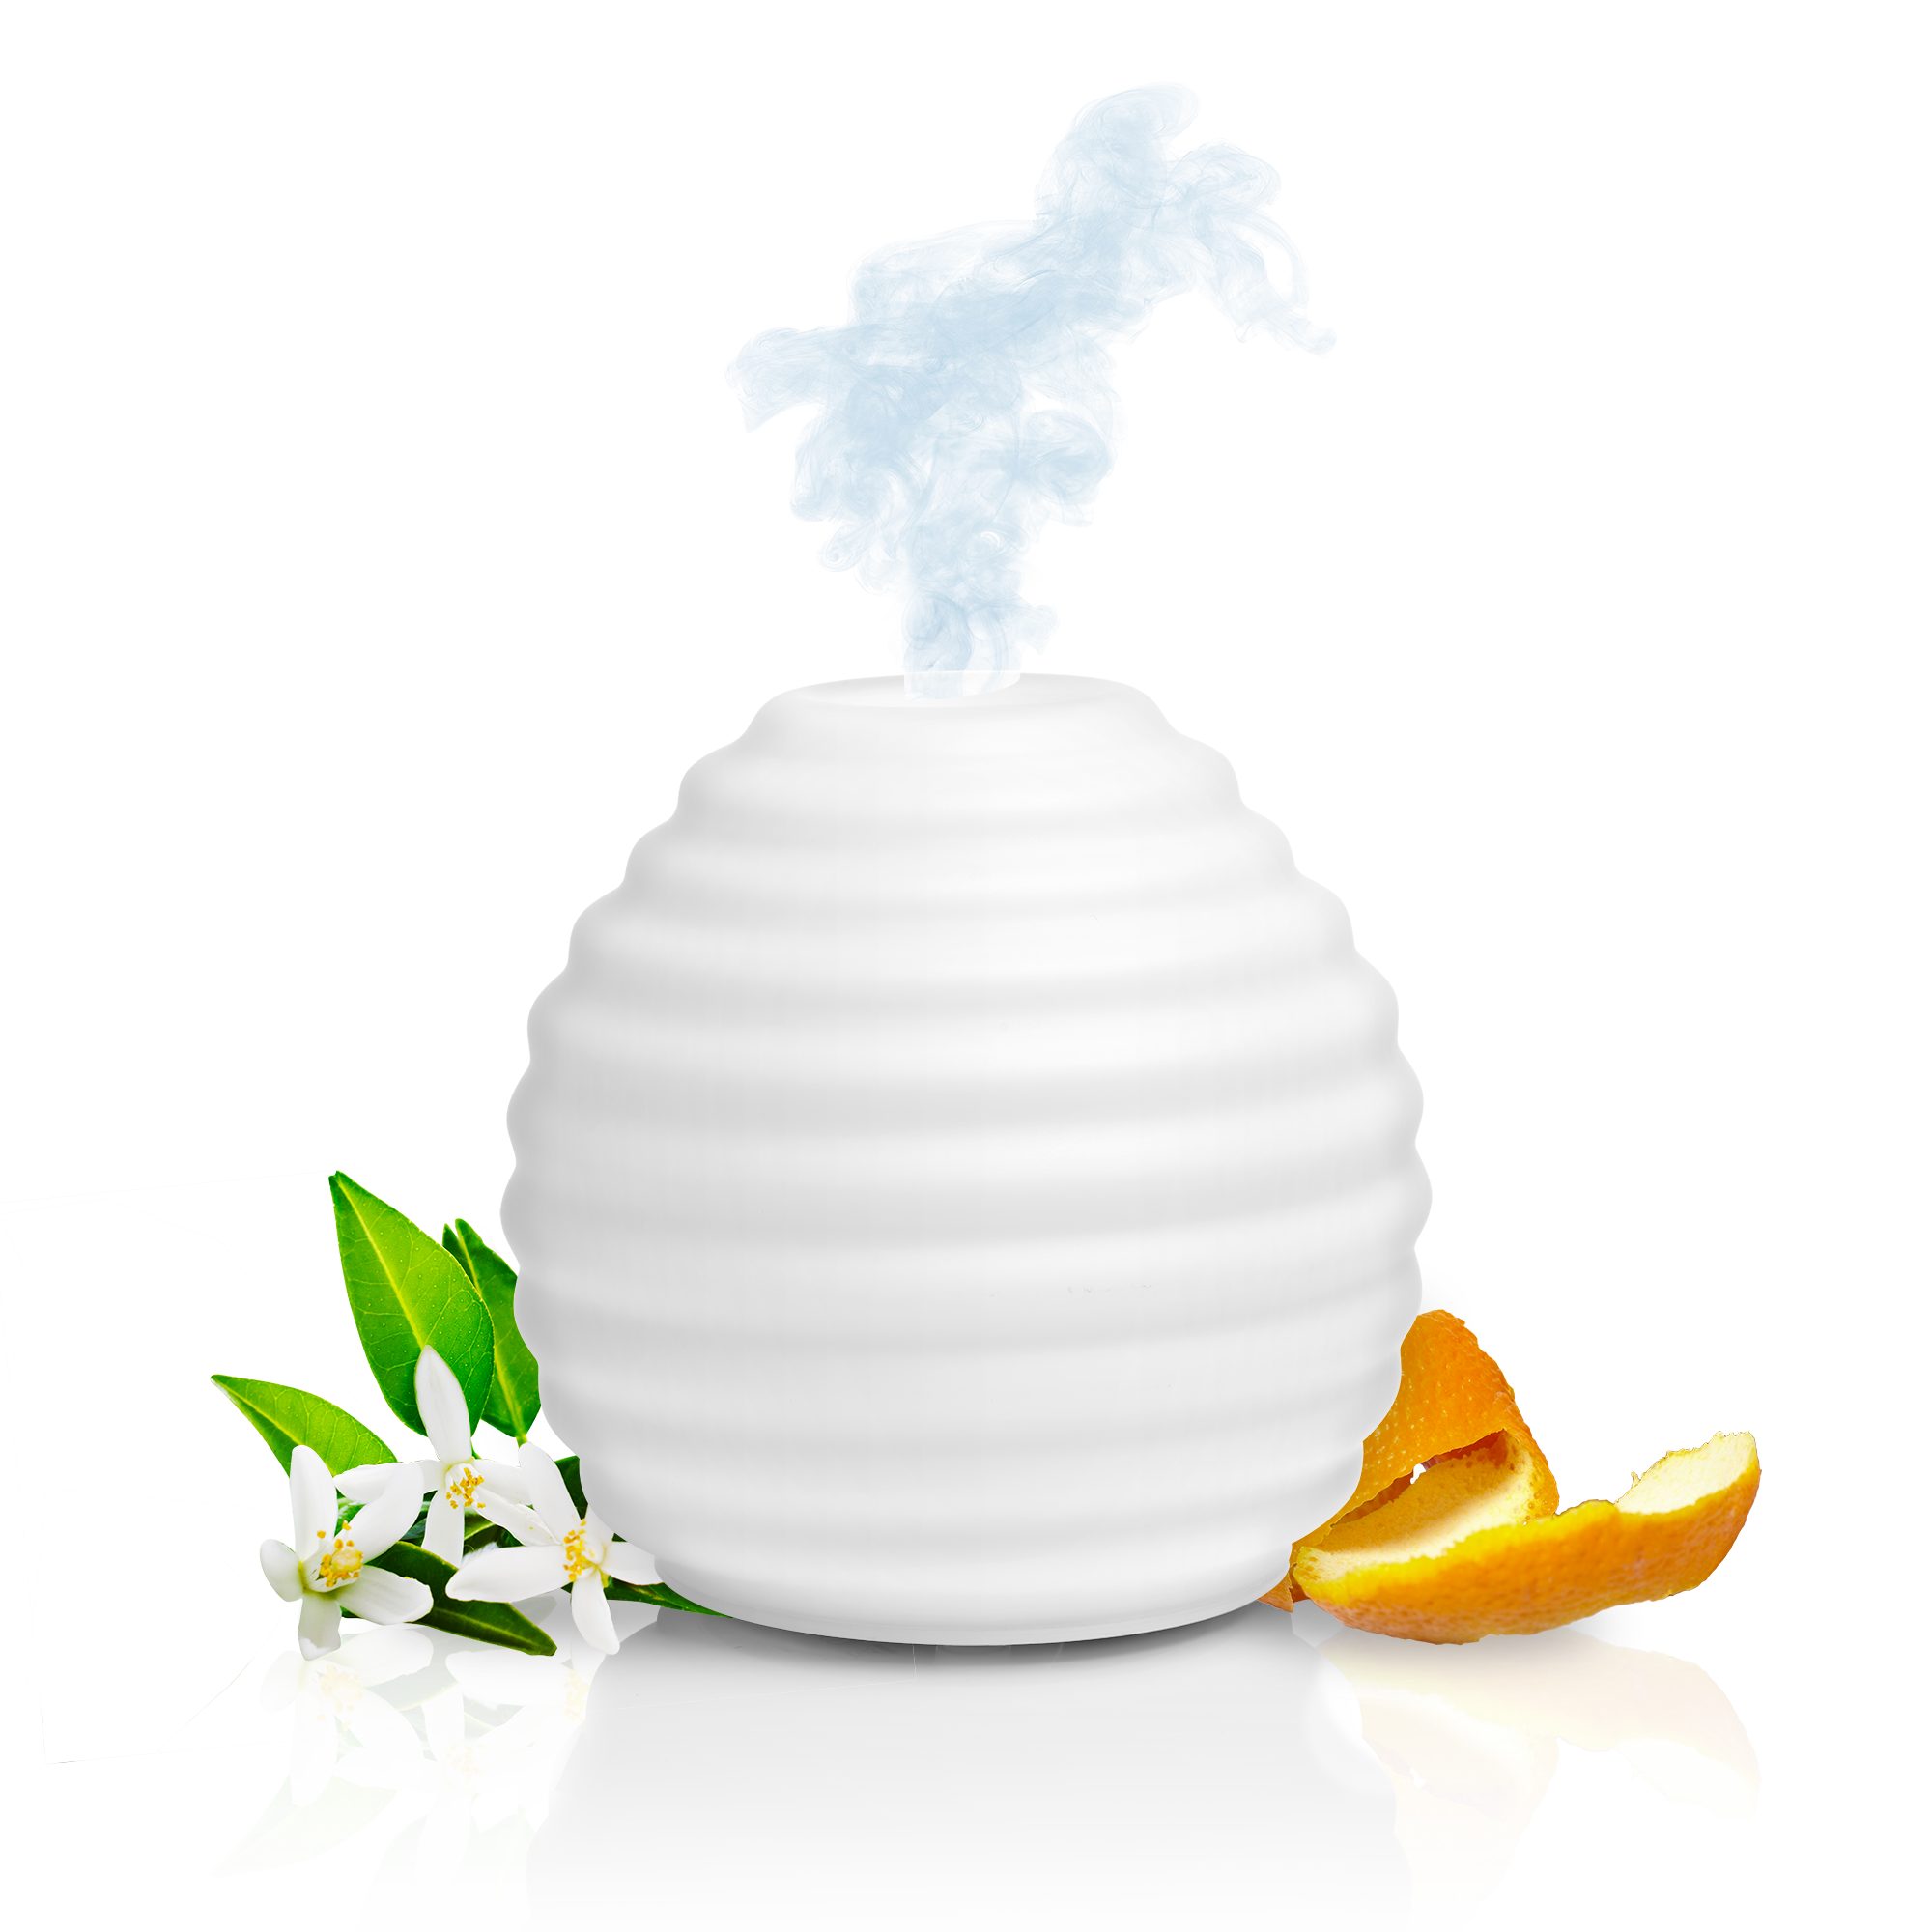 PURESSENTIEL DIFFUSEUR HUMIDIFICATEUR OVOID - My Mall Beauty